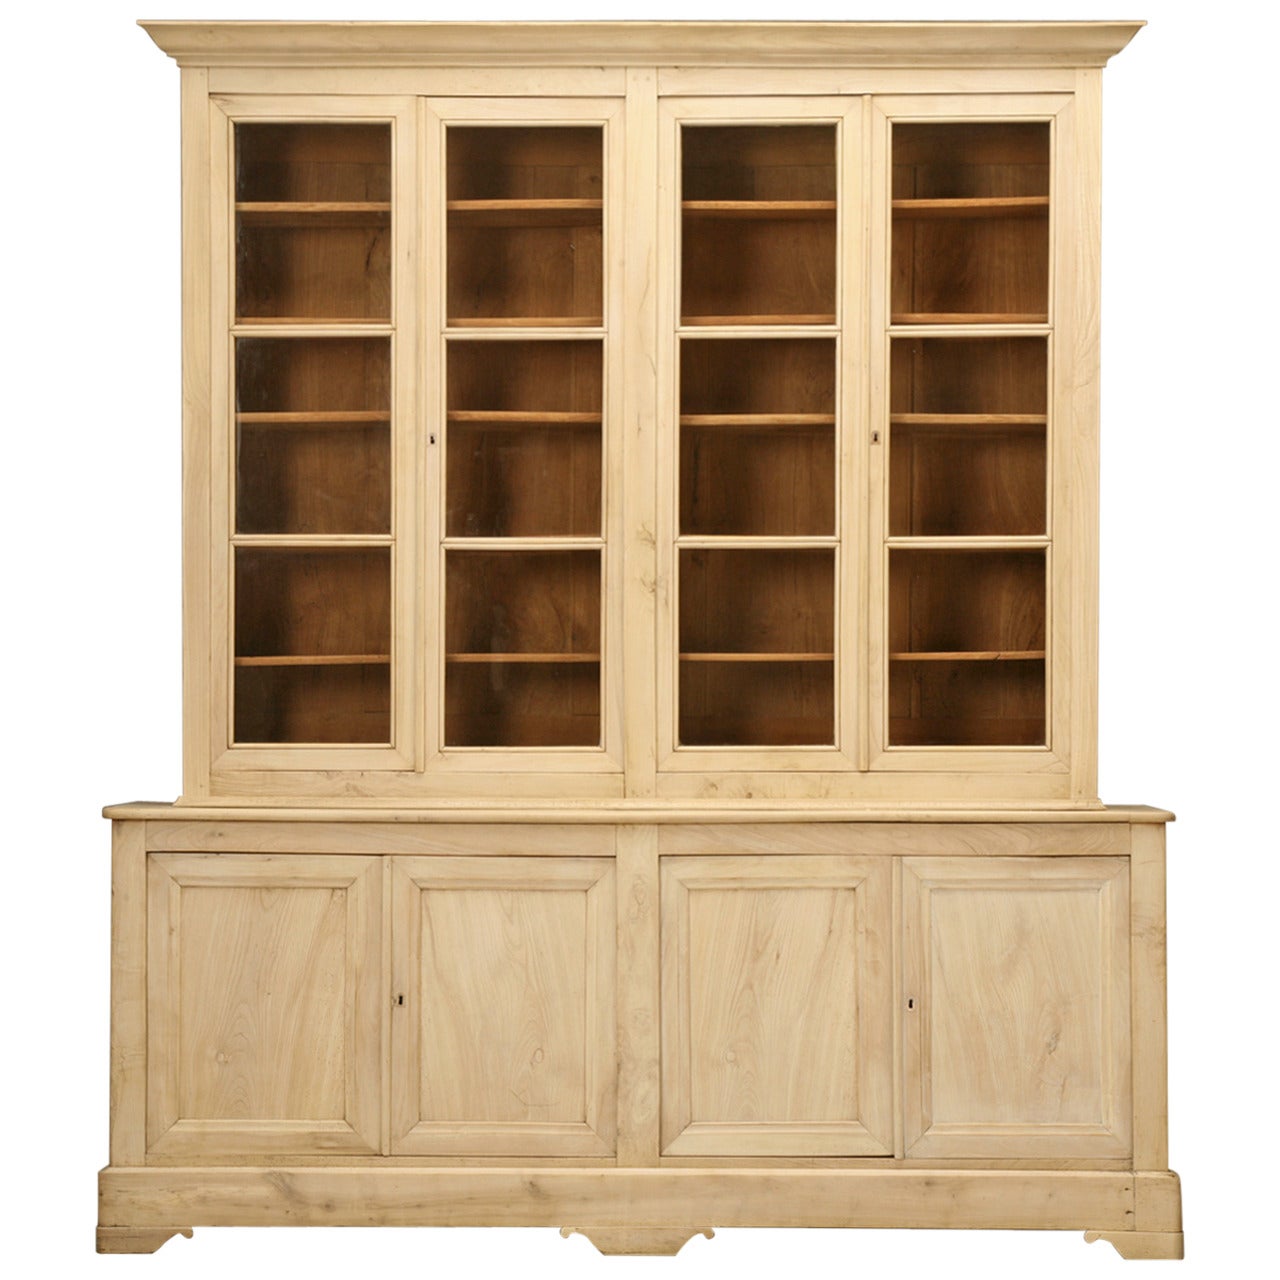 French Walnut Bookcase or China Cabinet in a Limed Finish, circa 1800s